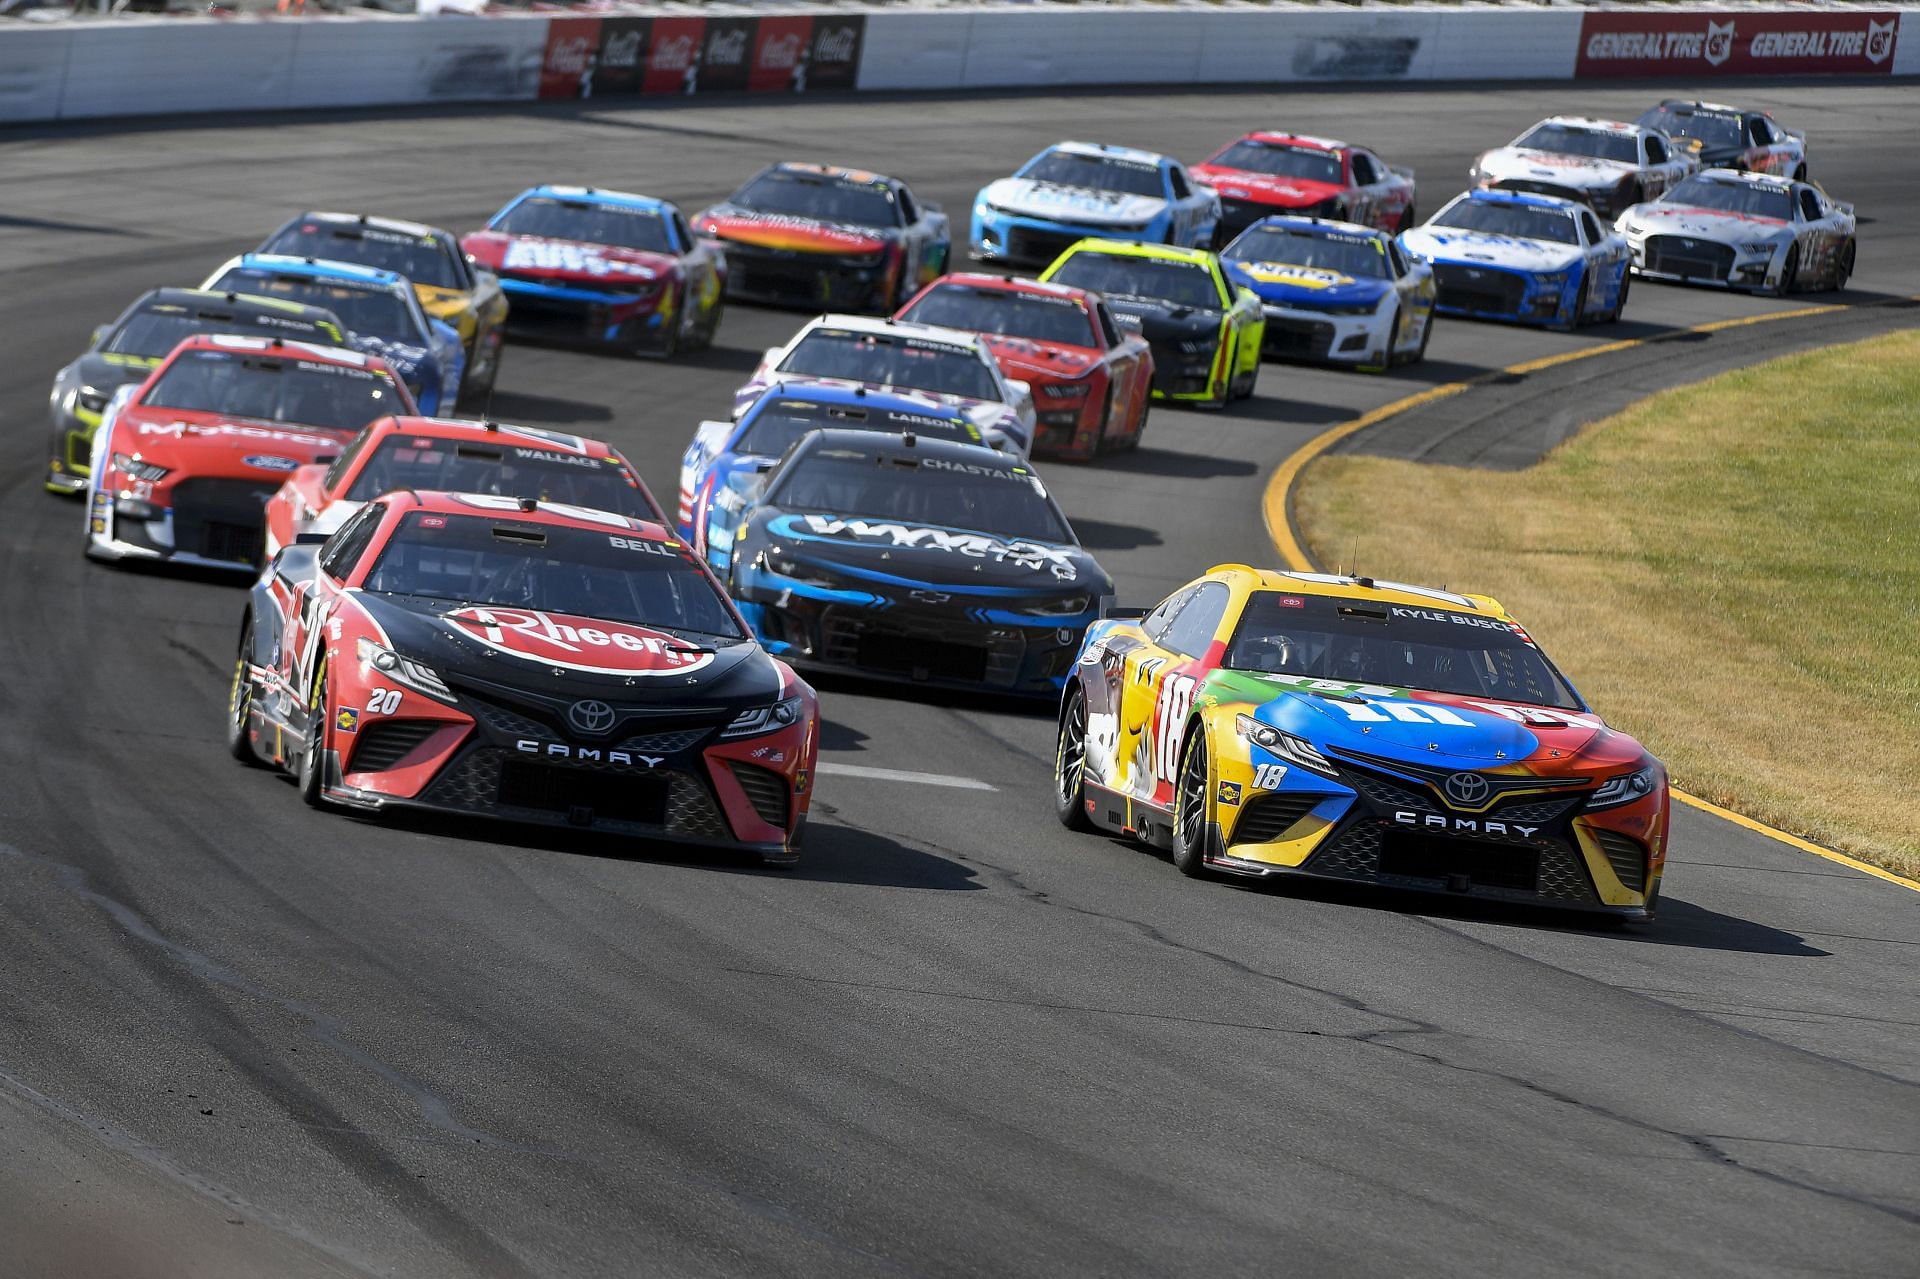 NASCAR 2022 Where to watch Verizon 200 at Indianapolis Motor Speedway race? Time, TV Schedule and Live Stream